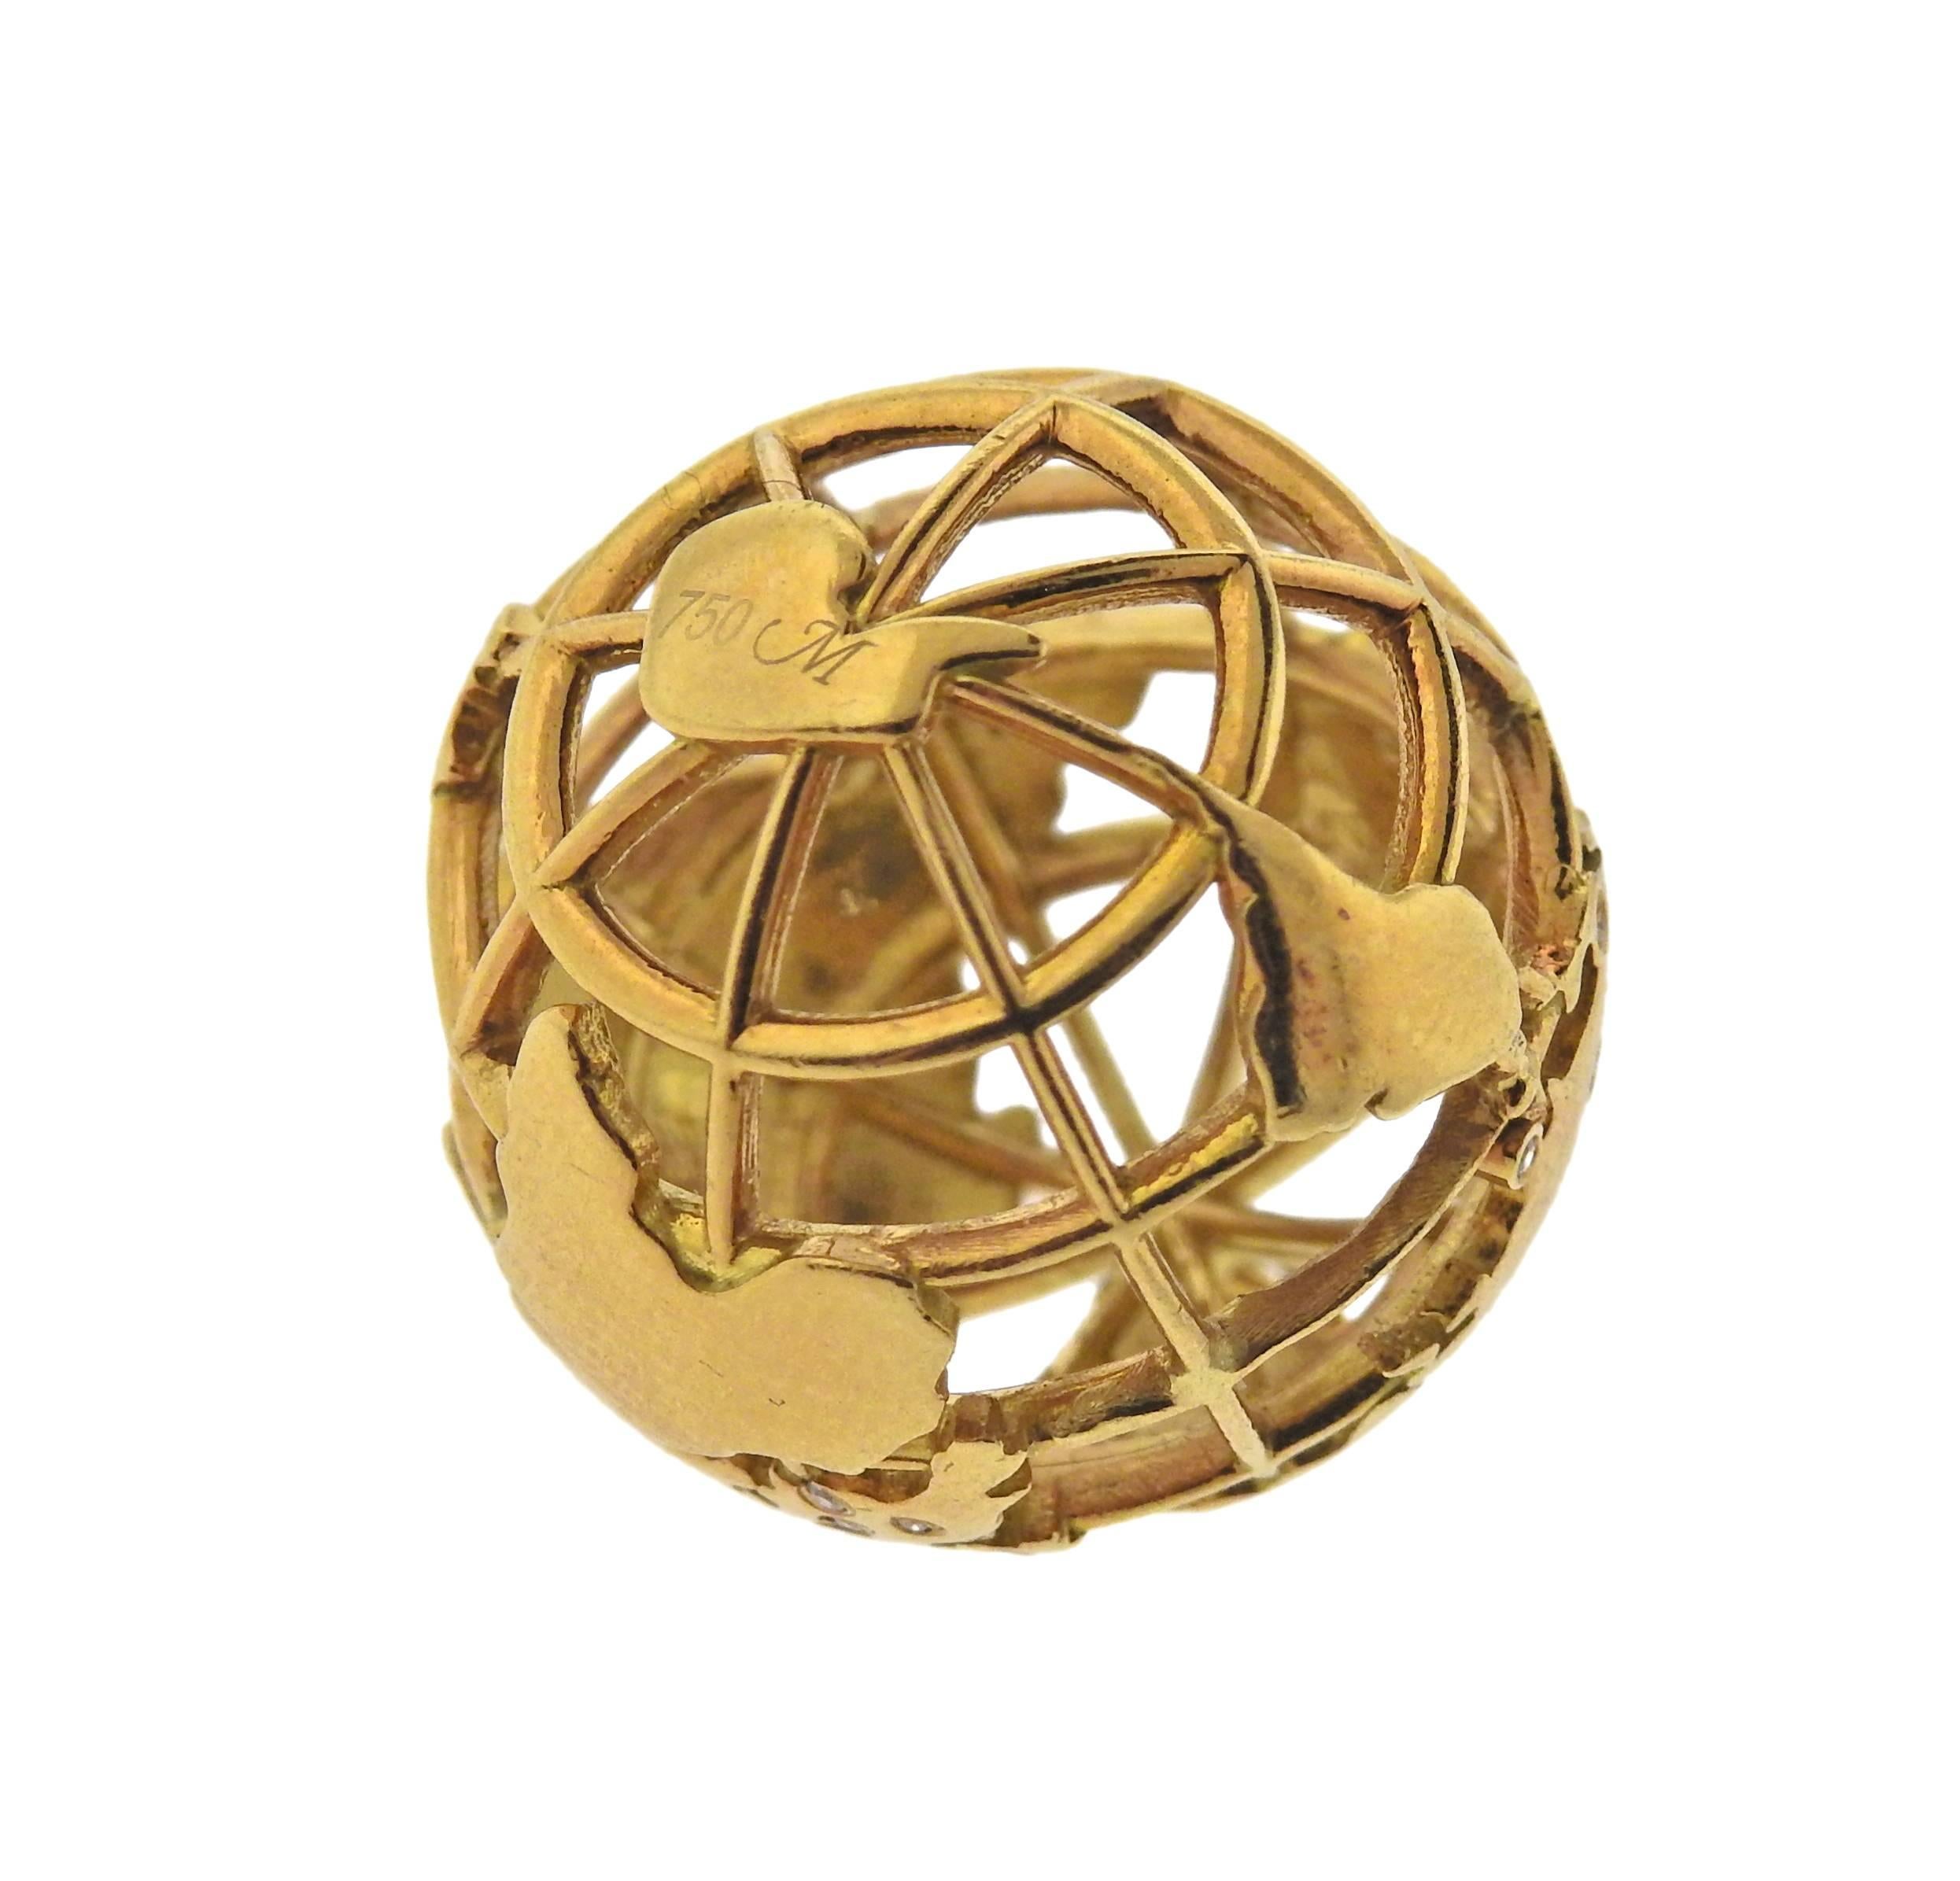 18k yellow gold charm by Monica Rich Kosann, set with diamonds, from My Earth collection. Retail $3525. Charm is 21mm in diameter x 24mm long with bale, weight is 10.5 grams. Marked 750, M mark. 